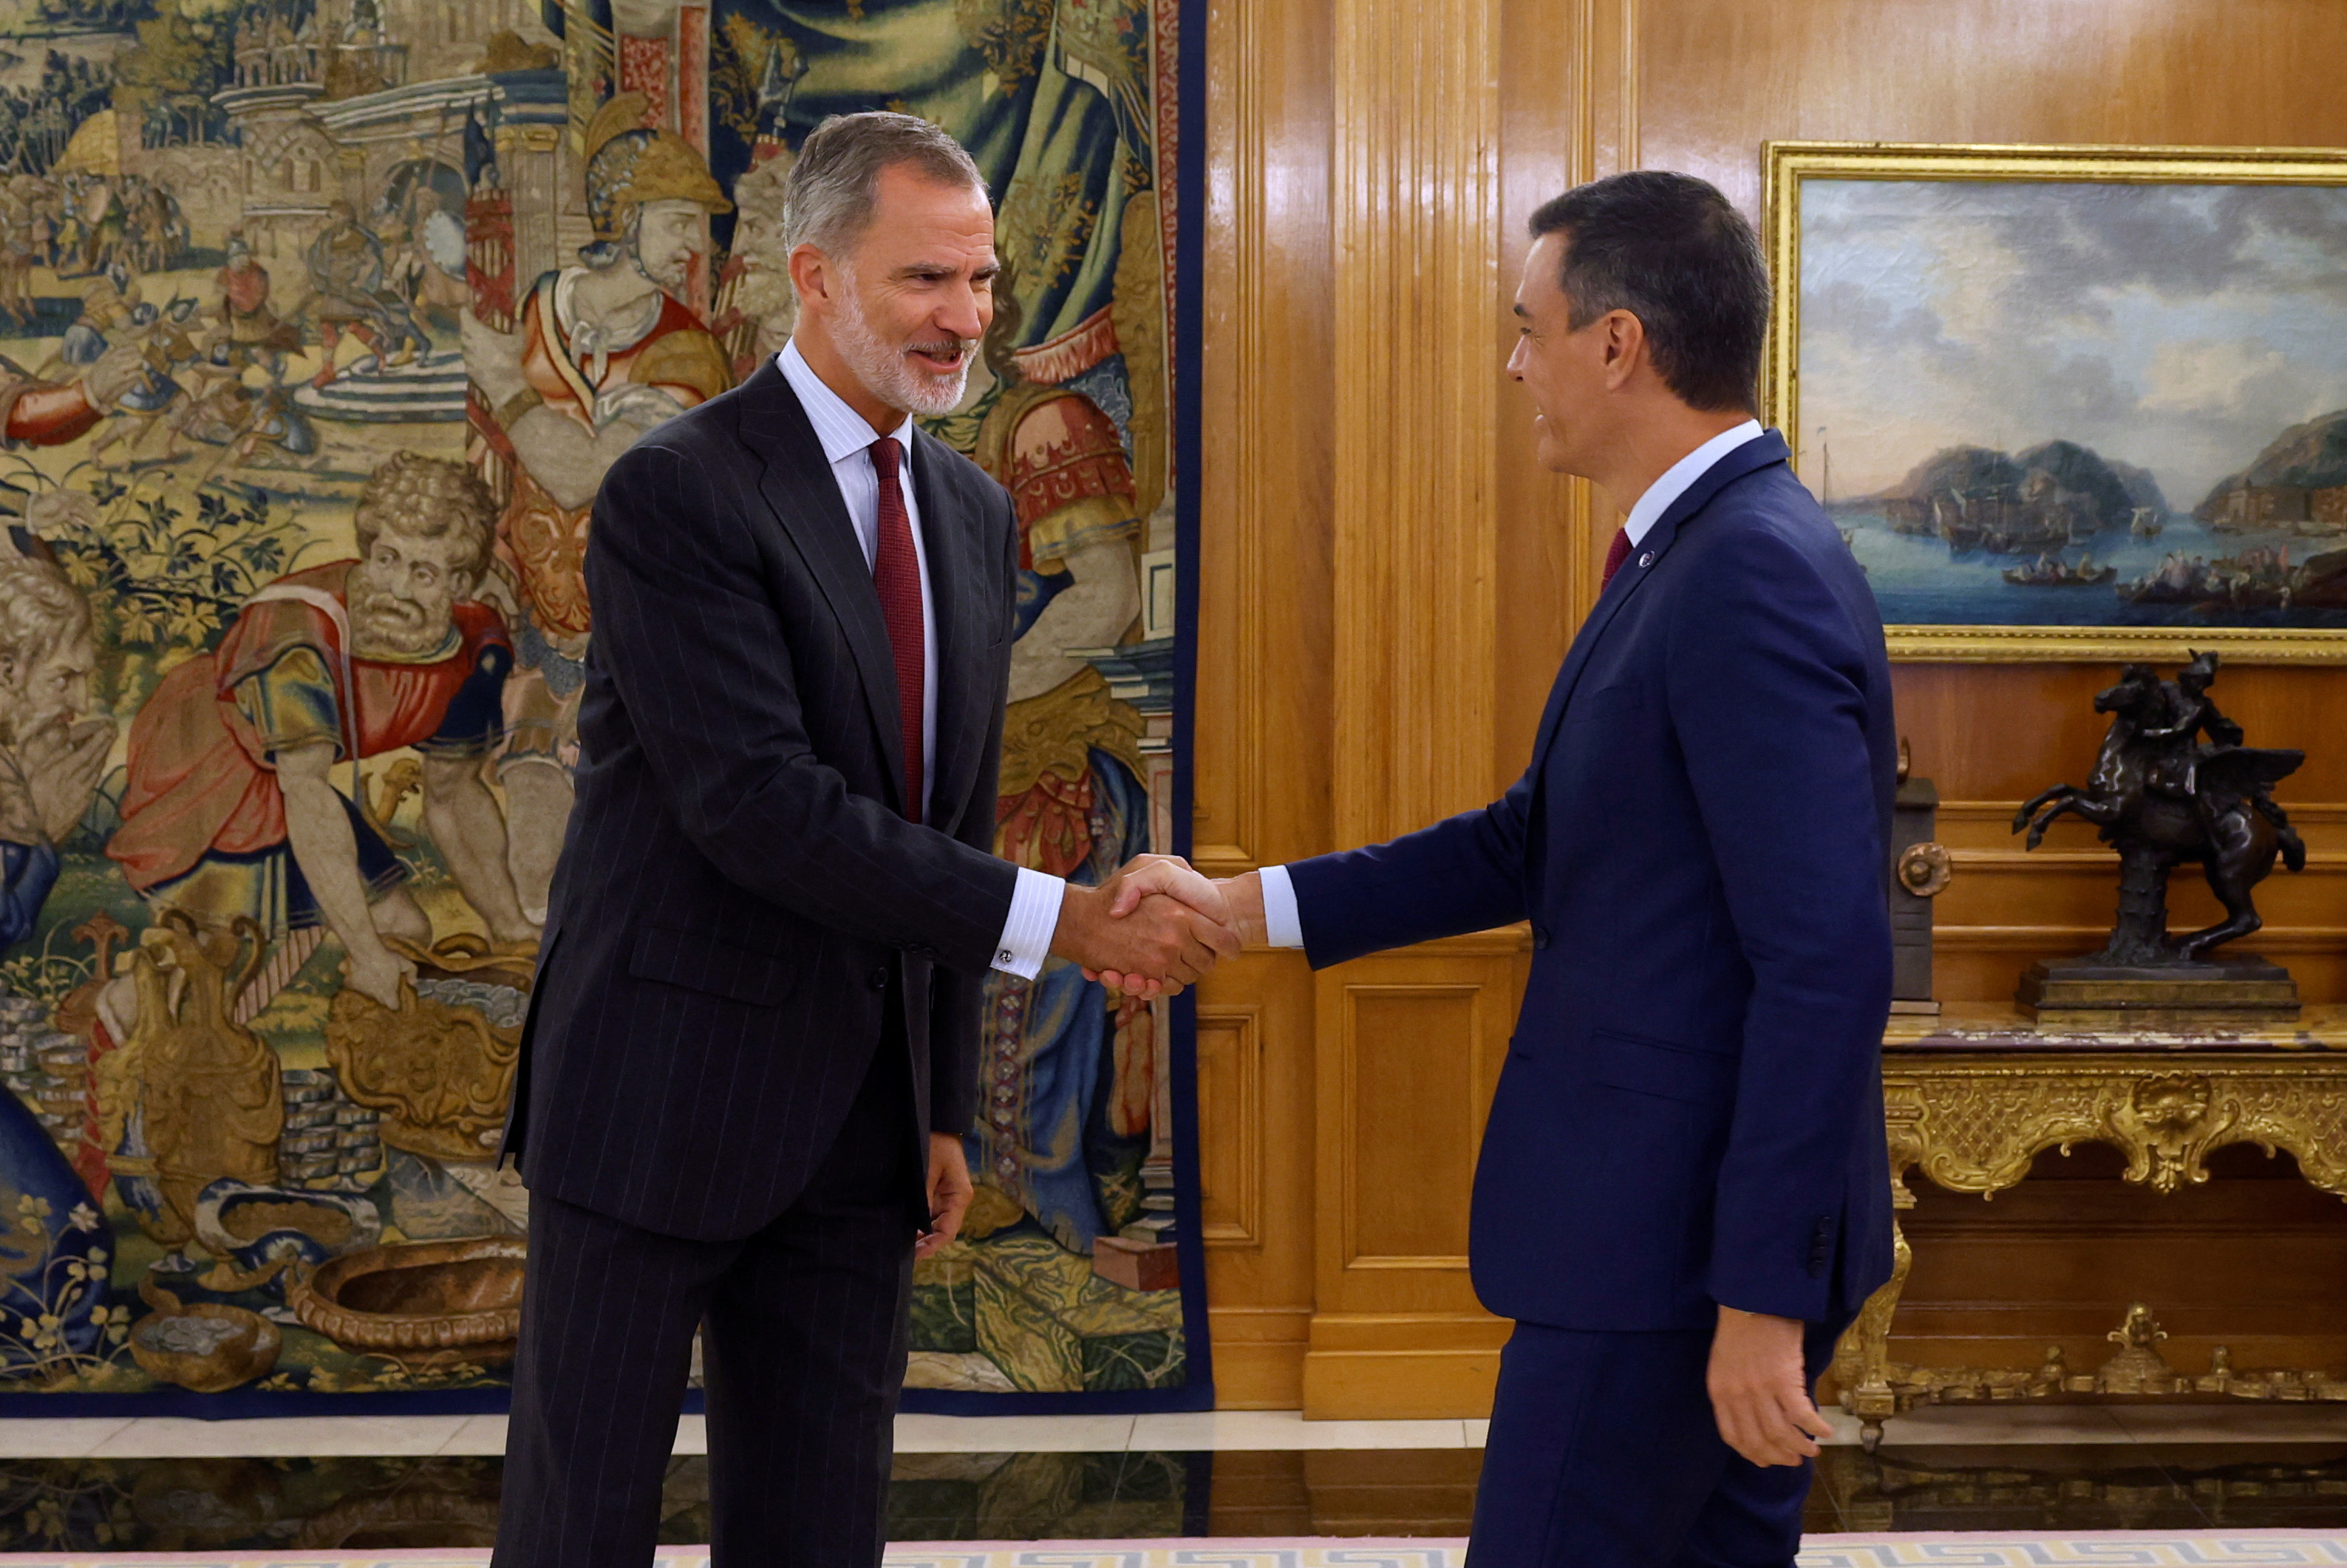 Spain's King Felipe and Spain's acting PM Sanchez meet at Zarzuela Palace